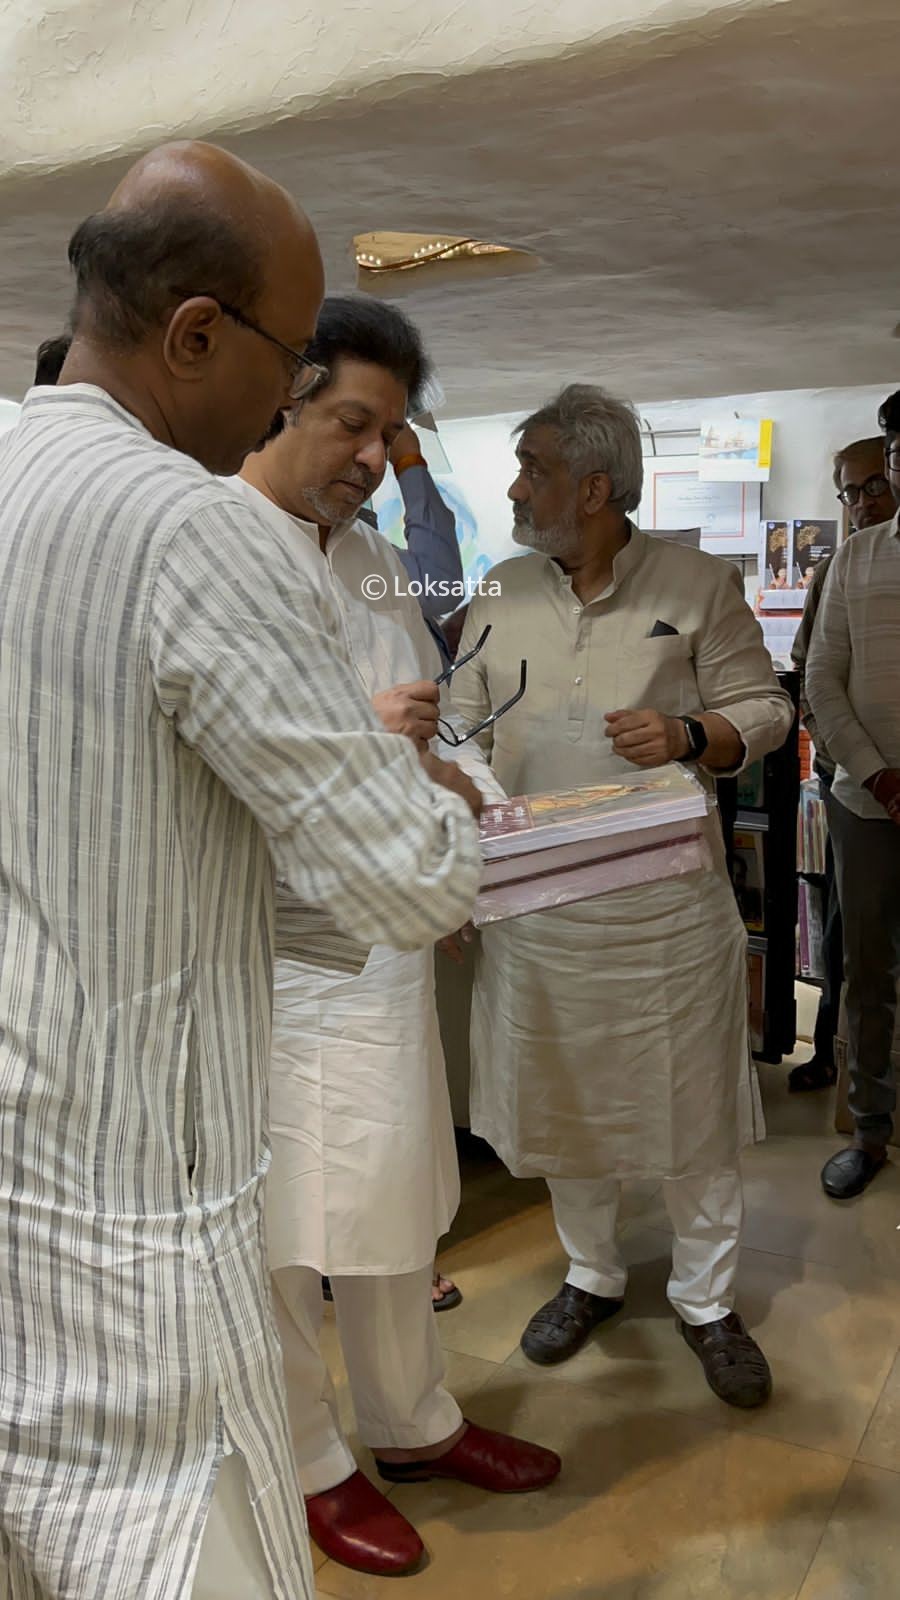 Raj Thackeray Visited A Book Shop in Pune Buy 200 books worth 50000 rs